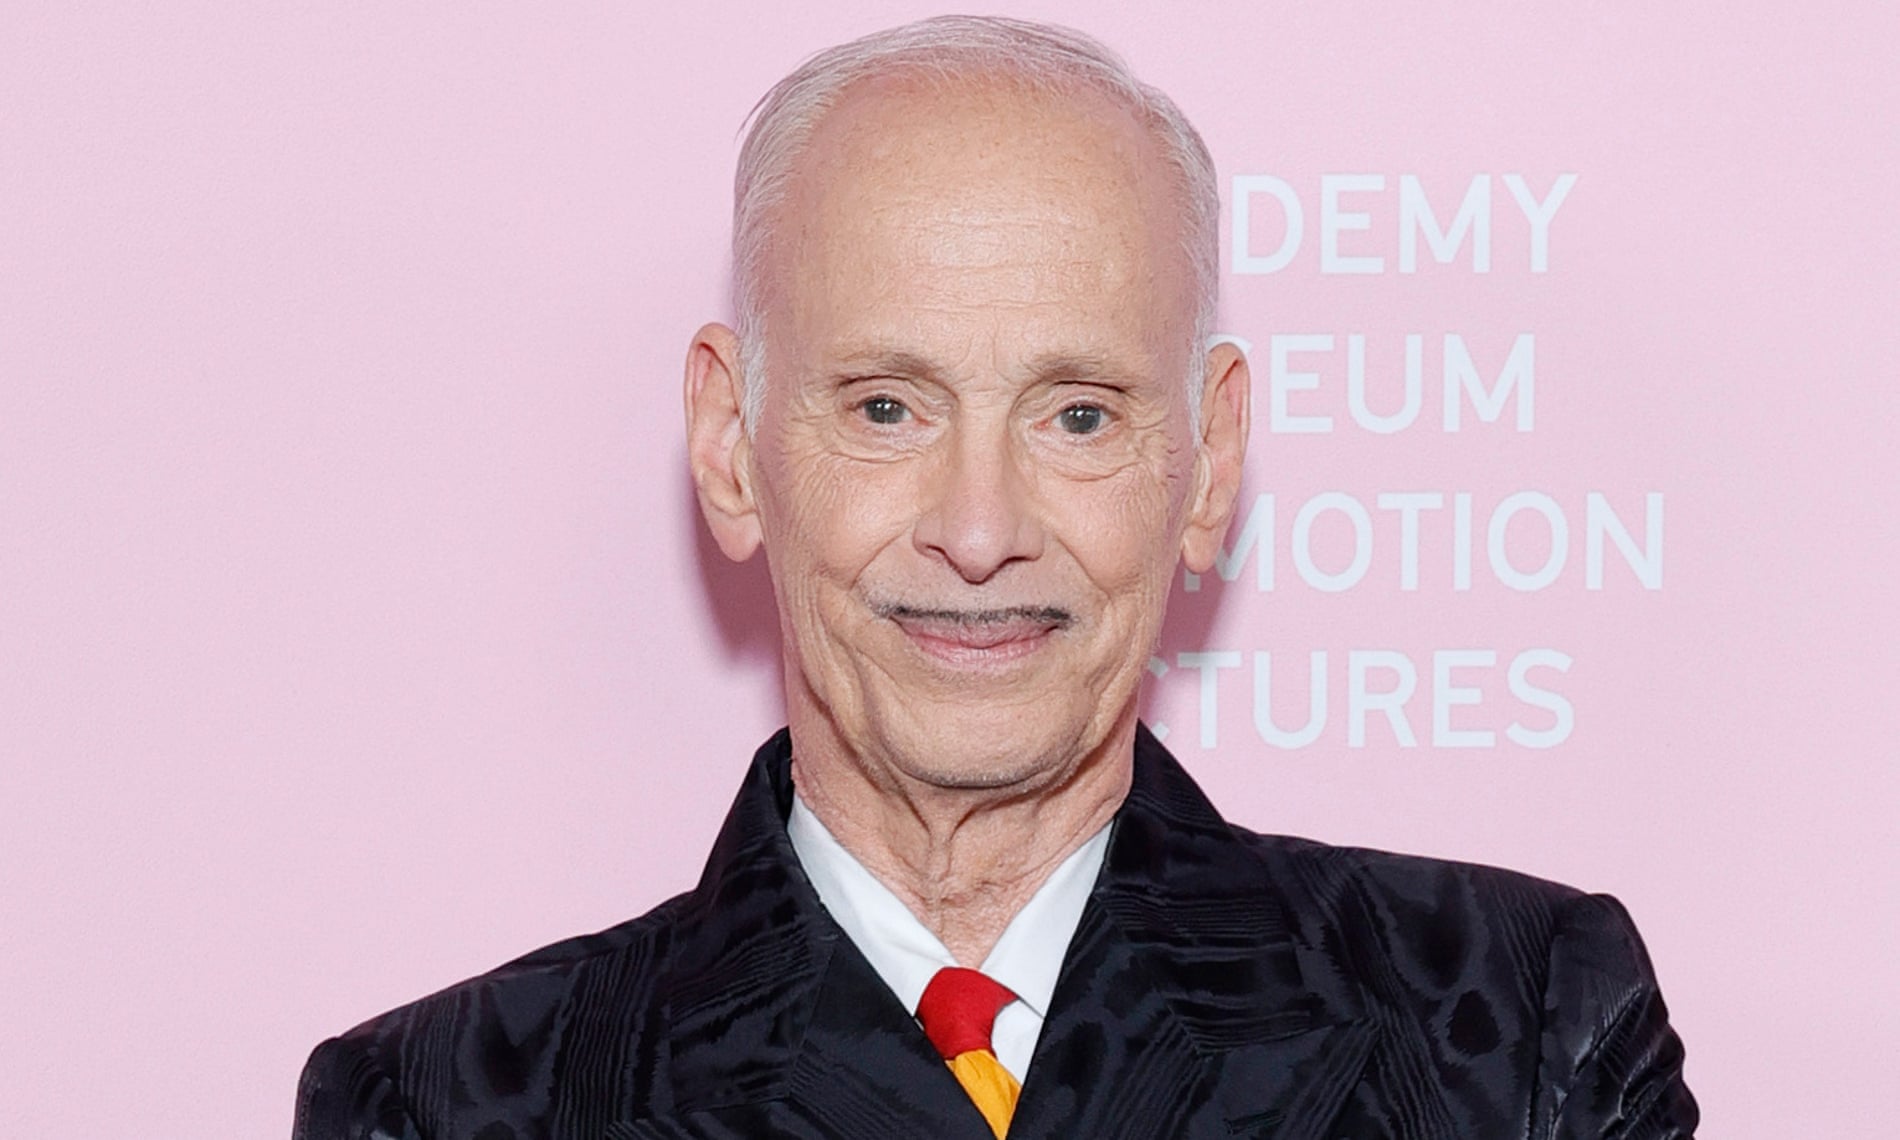 OH DEAR! Shock director John Waters to make first film in 20 years 😛